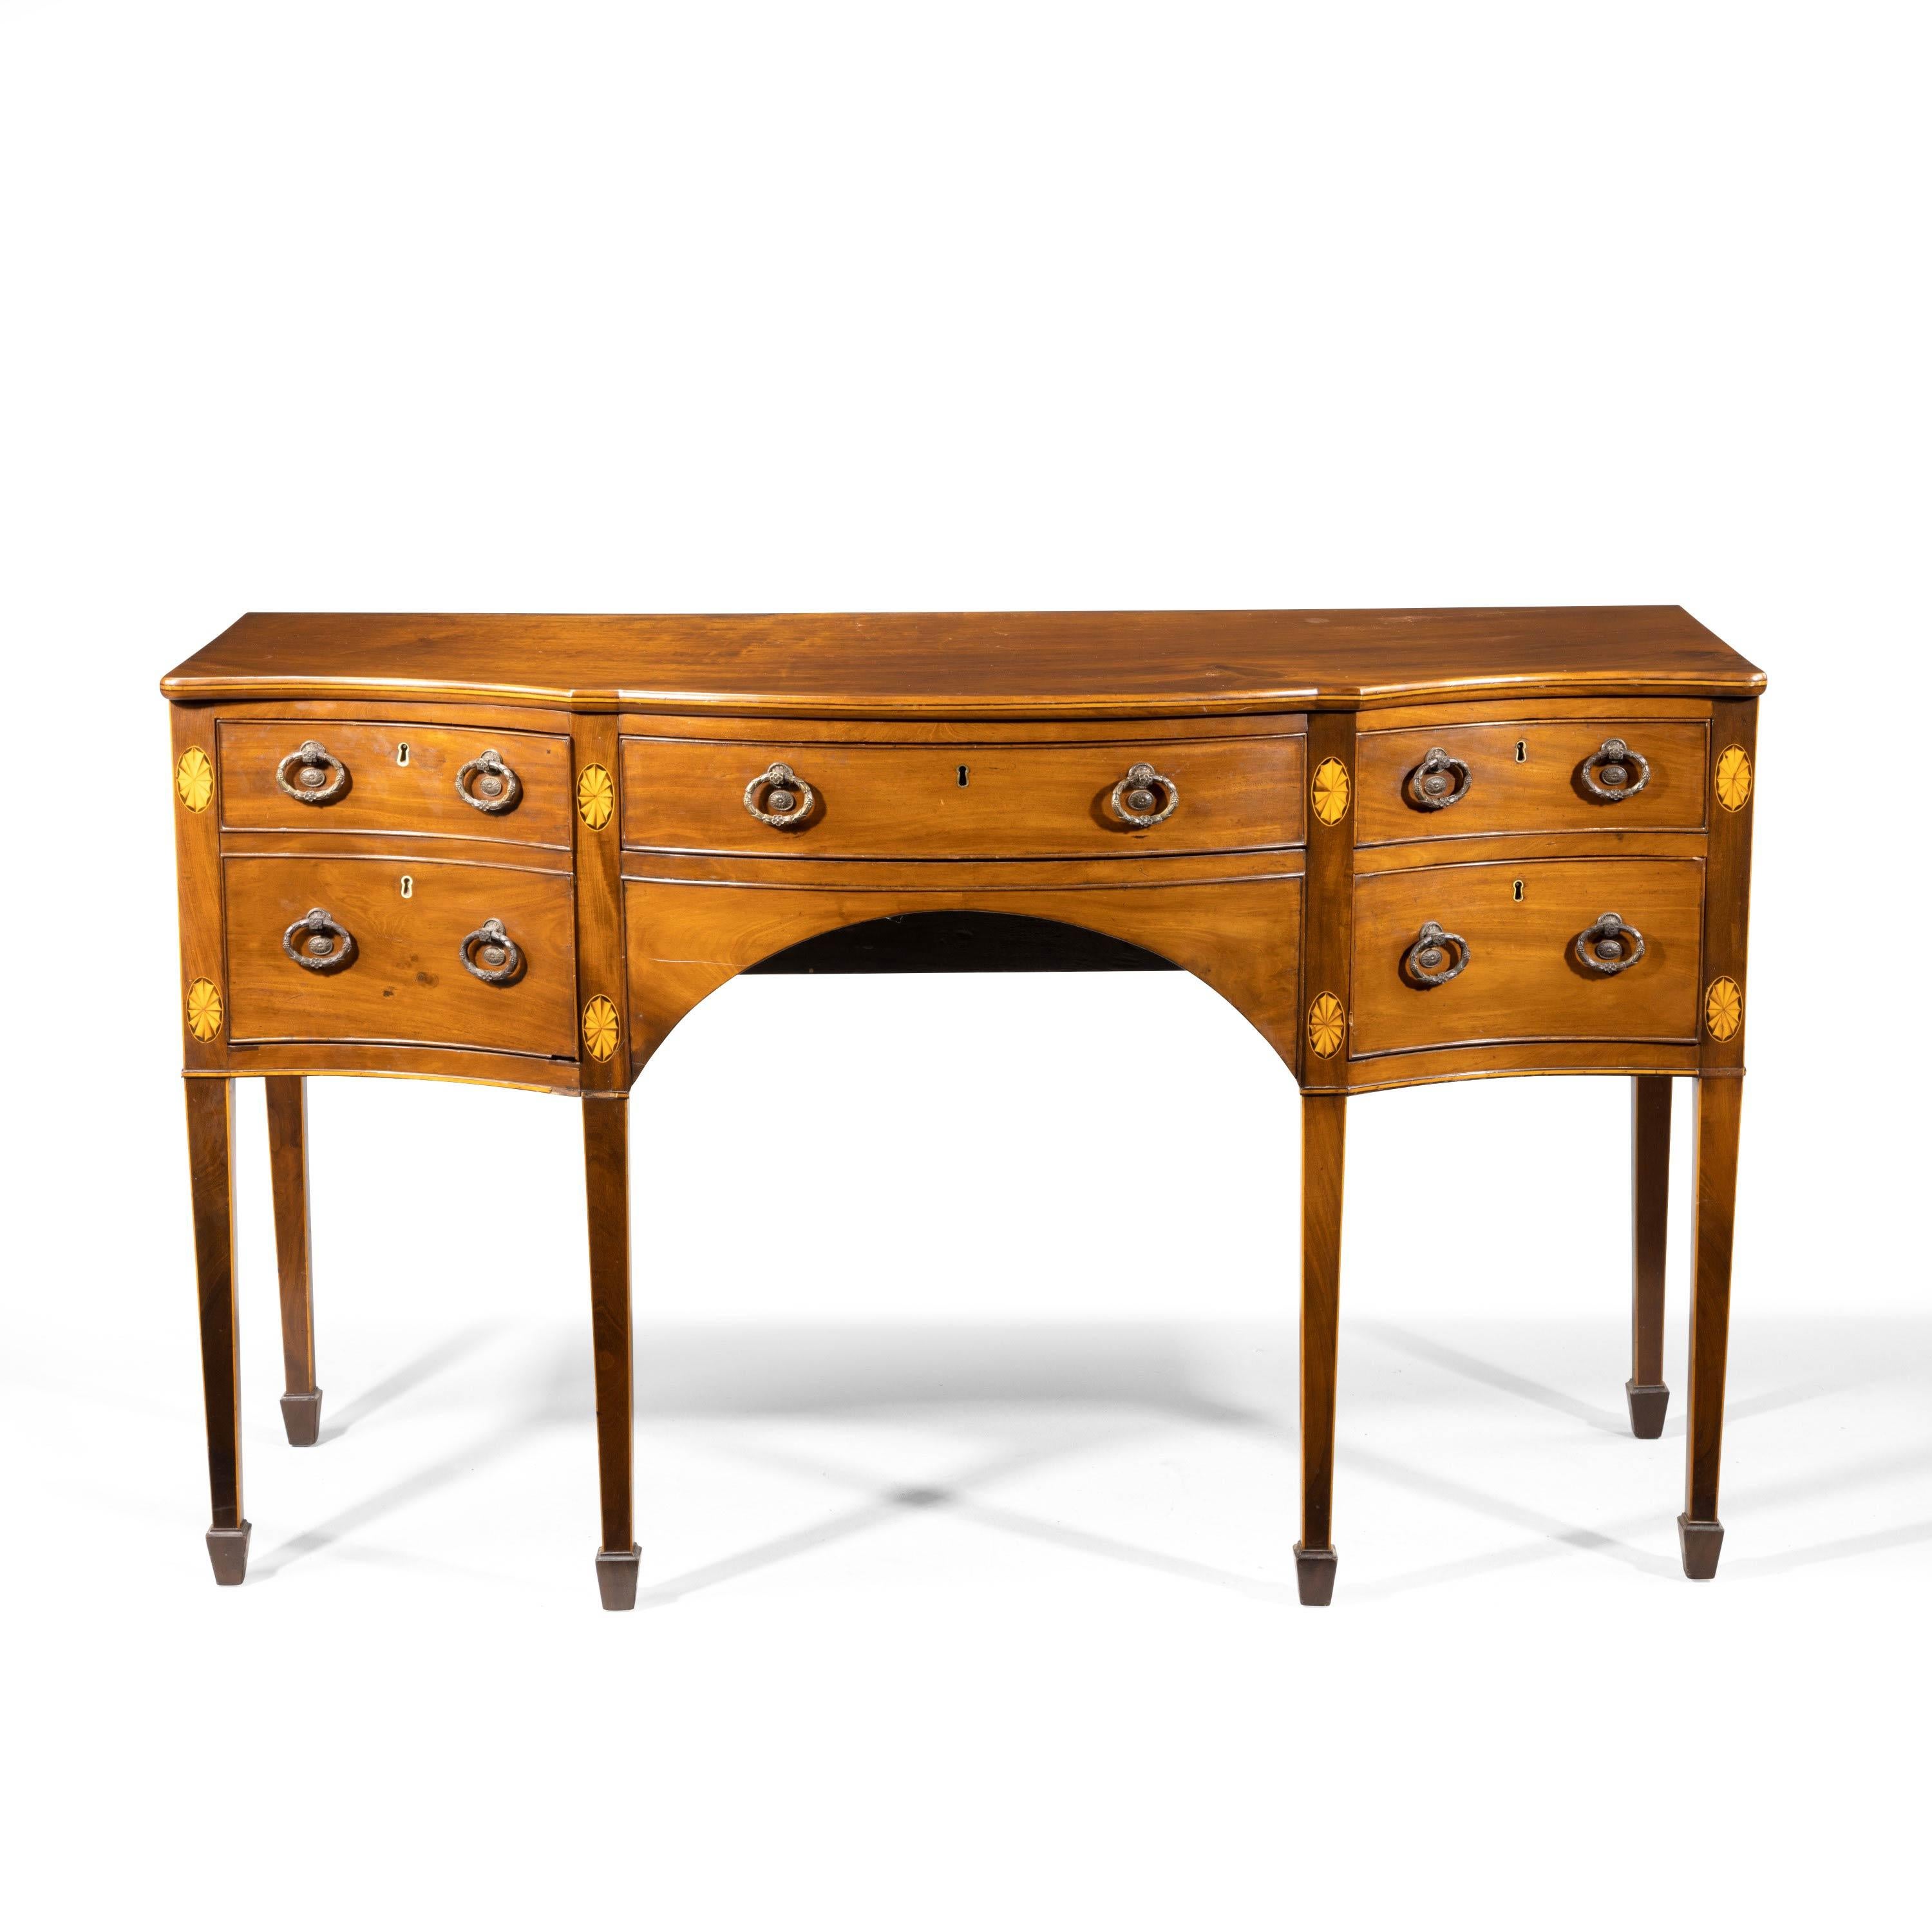 Mahogany Very Fine George III Period Sideboard by Gillows of Lancaster